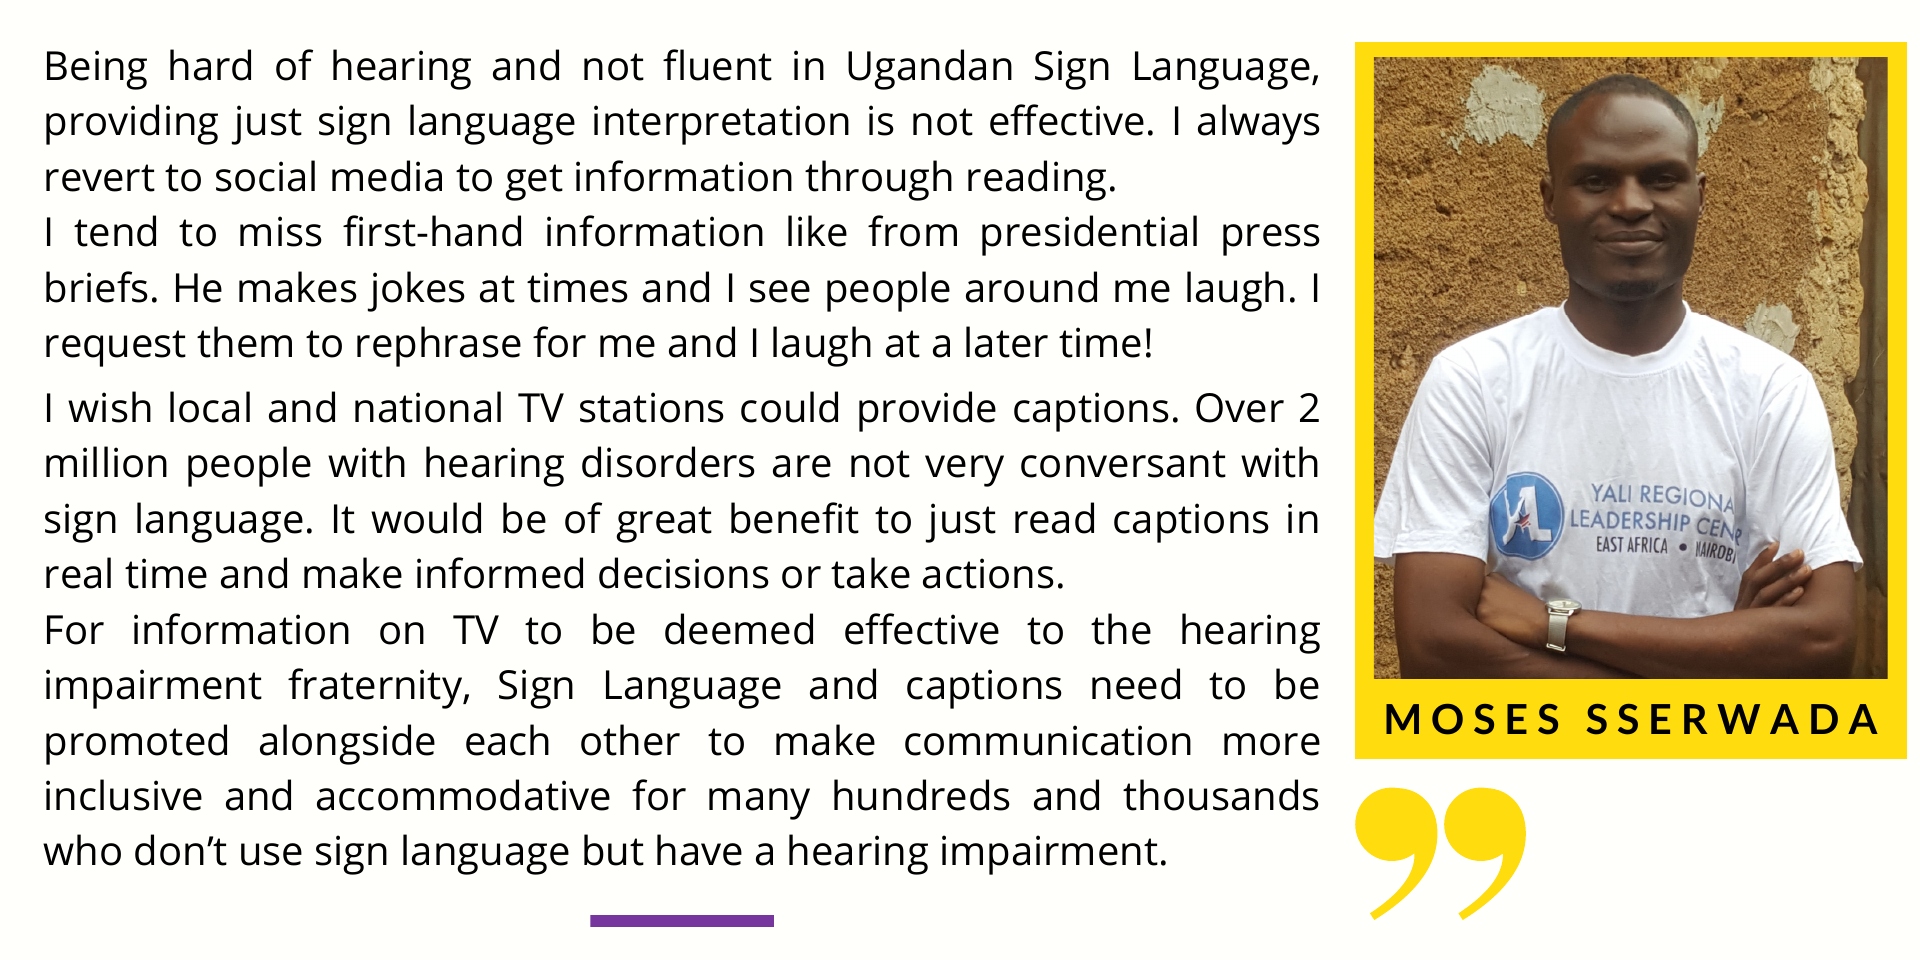 Moses Sserwada says Honestly in my particular case, being hard of hearing and not fluent in Ugandan Sign Language, providing just sign language interpretation is not effective. I always revert to social media to get information through reading. However, some social media information is distorted. I tend to miss first-hand information for example from presidential press briefs. He makes jokes at times and I see people around me laugh. I request them to rephrase for me and I laugh at a later time! I wish local and national TV stations could provide captions. Over 2 million people with hearing disorders are not very conversant with sign language. It would greatly benefit by just reading captions in real time and make informed decisions or take actions. For information on TV to be deemed effective to the hearing impairment fraternity, Sign Language and captions need to be promoted alongside each other to make communication more inclusive and accommodative for many hundreds and thousands who don’t use sign language but have a hearing impairment.